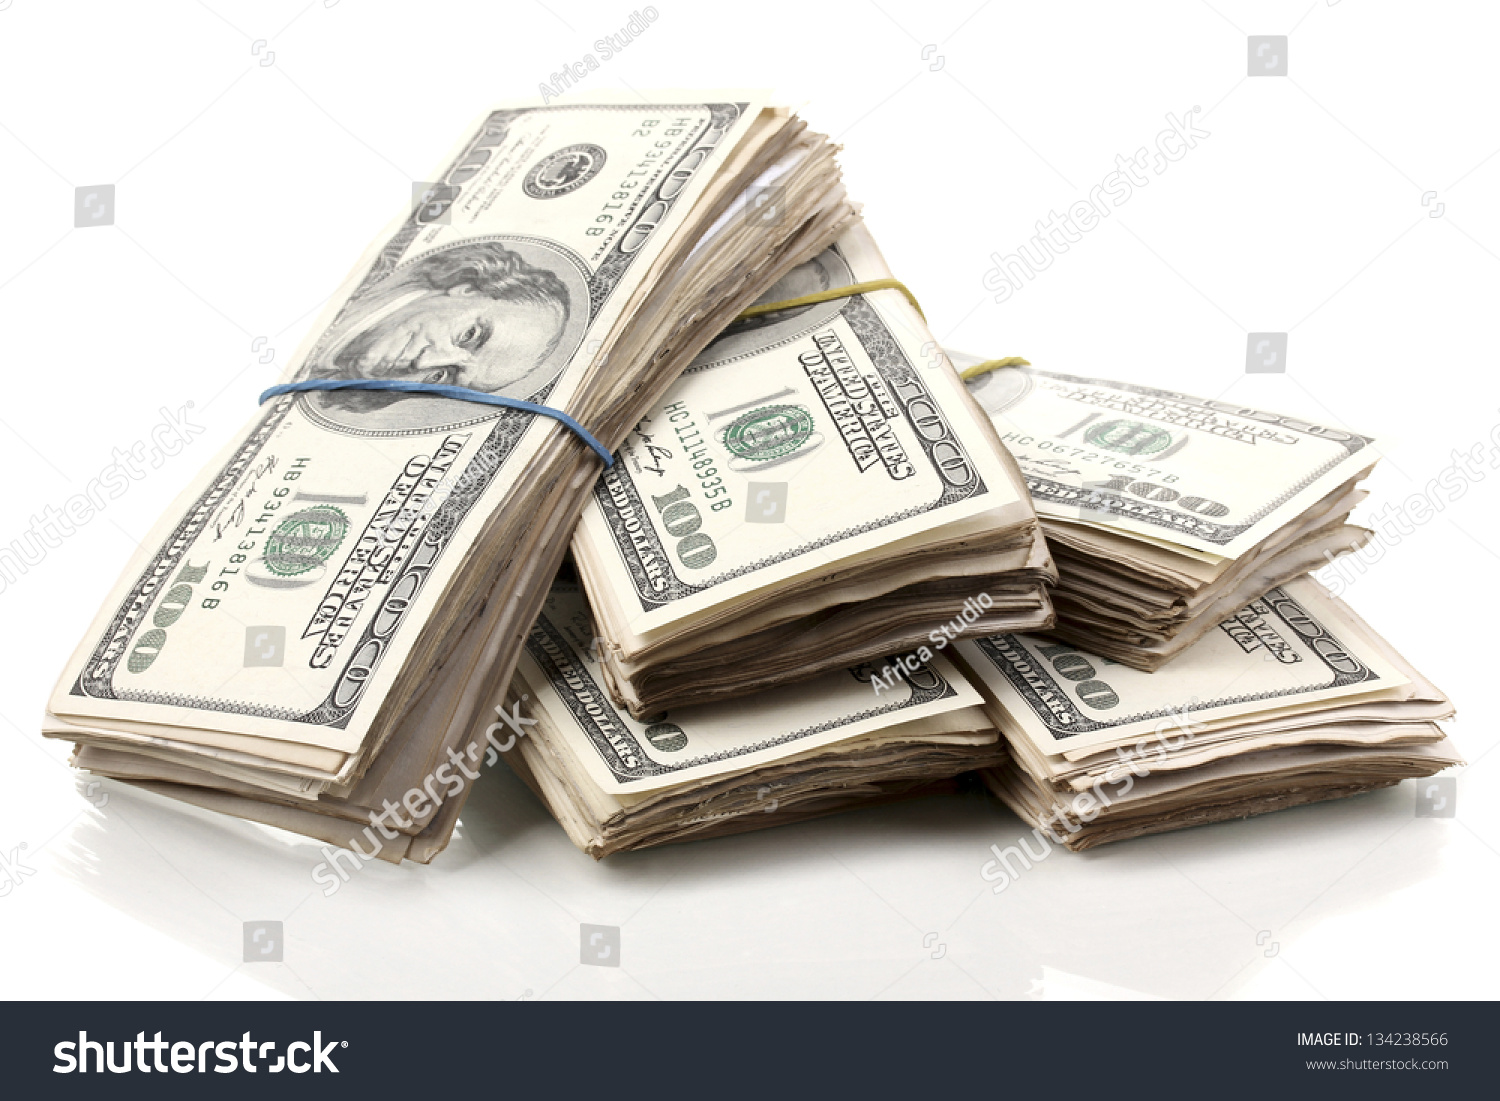 Stacks of one hundred dollars banknotes close-up isolated on white #134238566